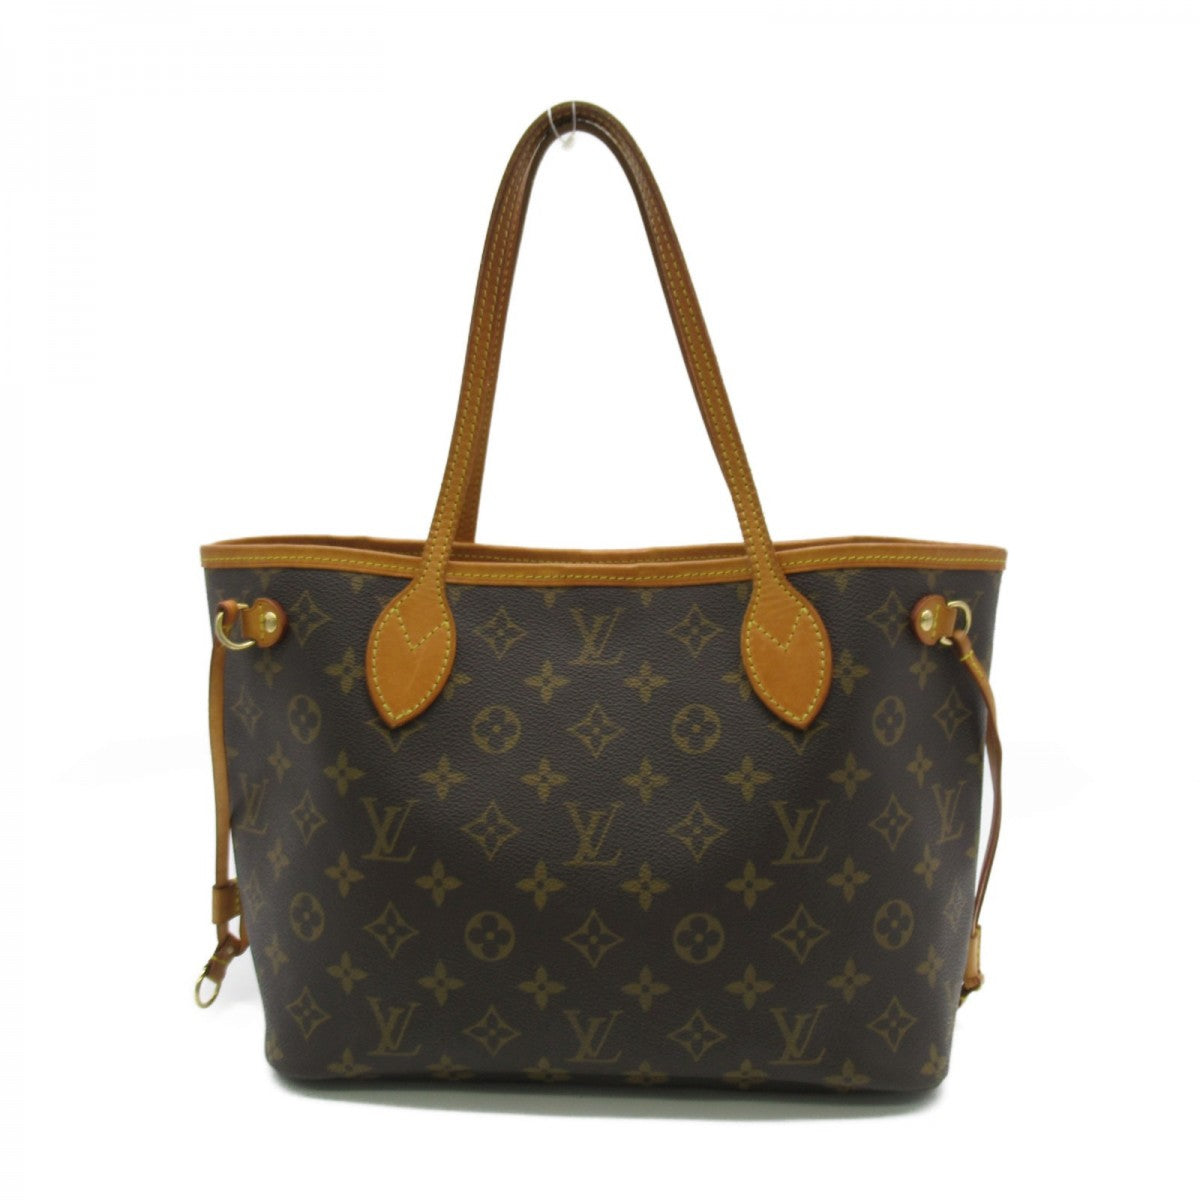 Louis Vuitton Monogram Neverfull PM Canvas Tote Bag M40155 in Good condition